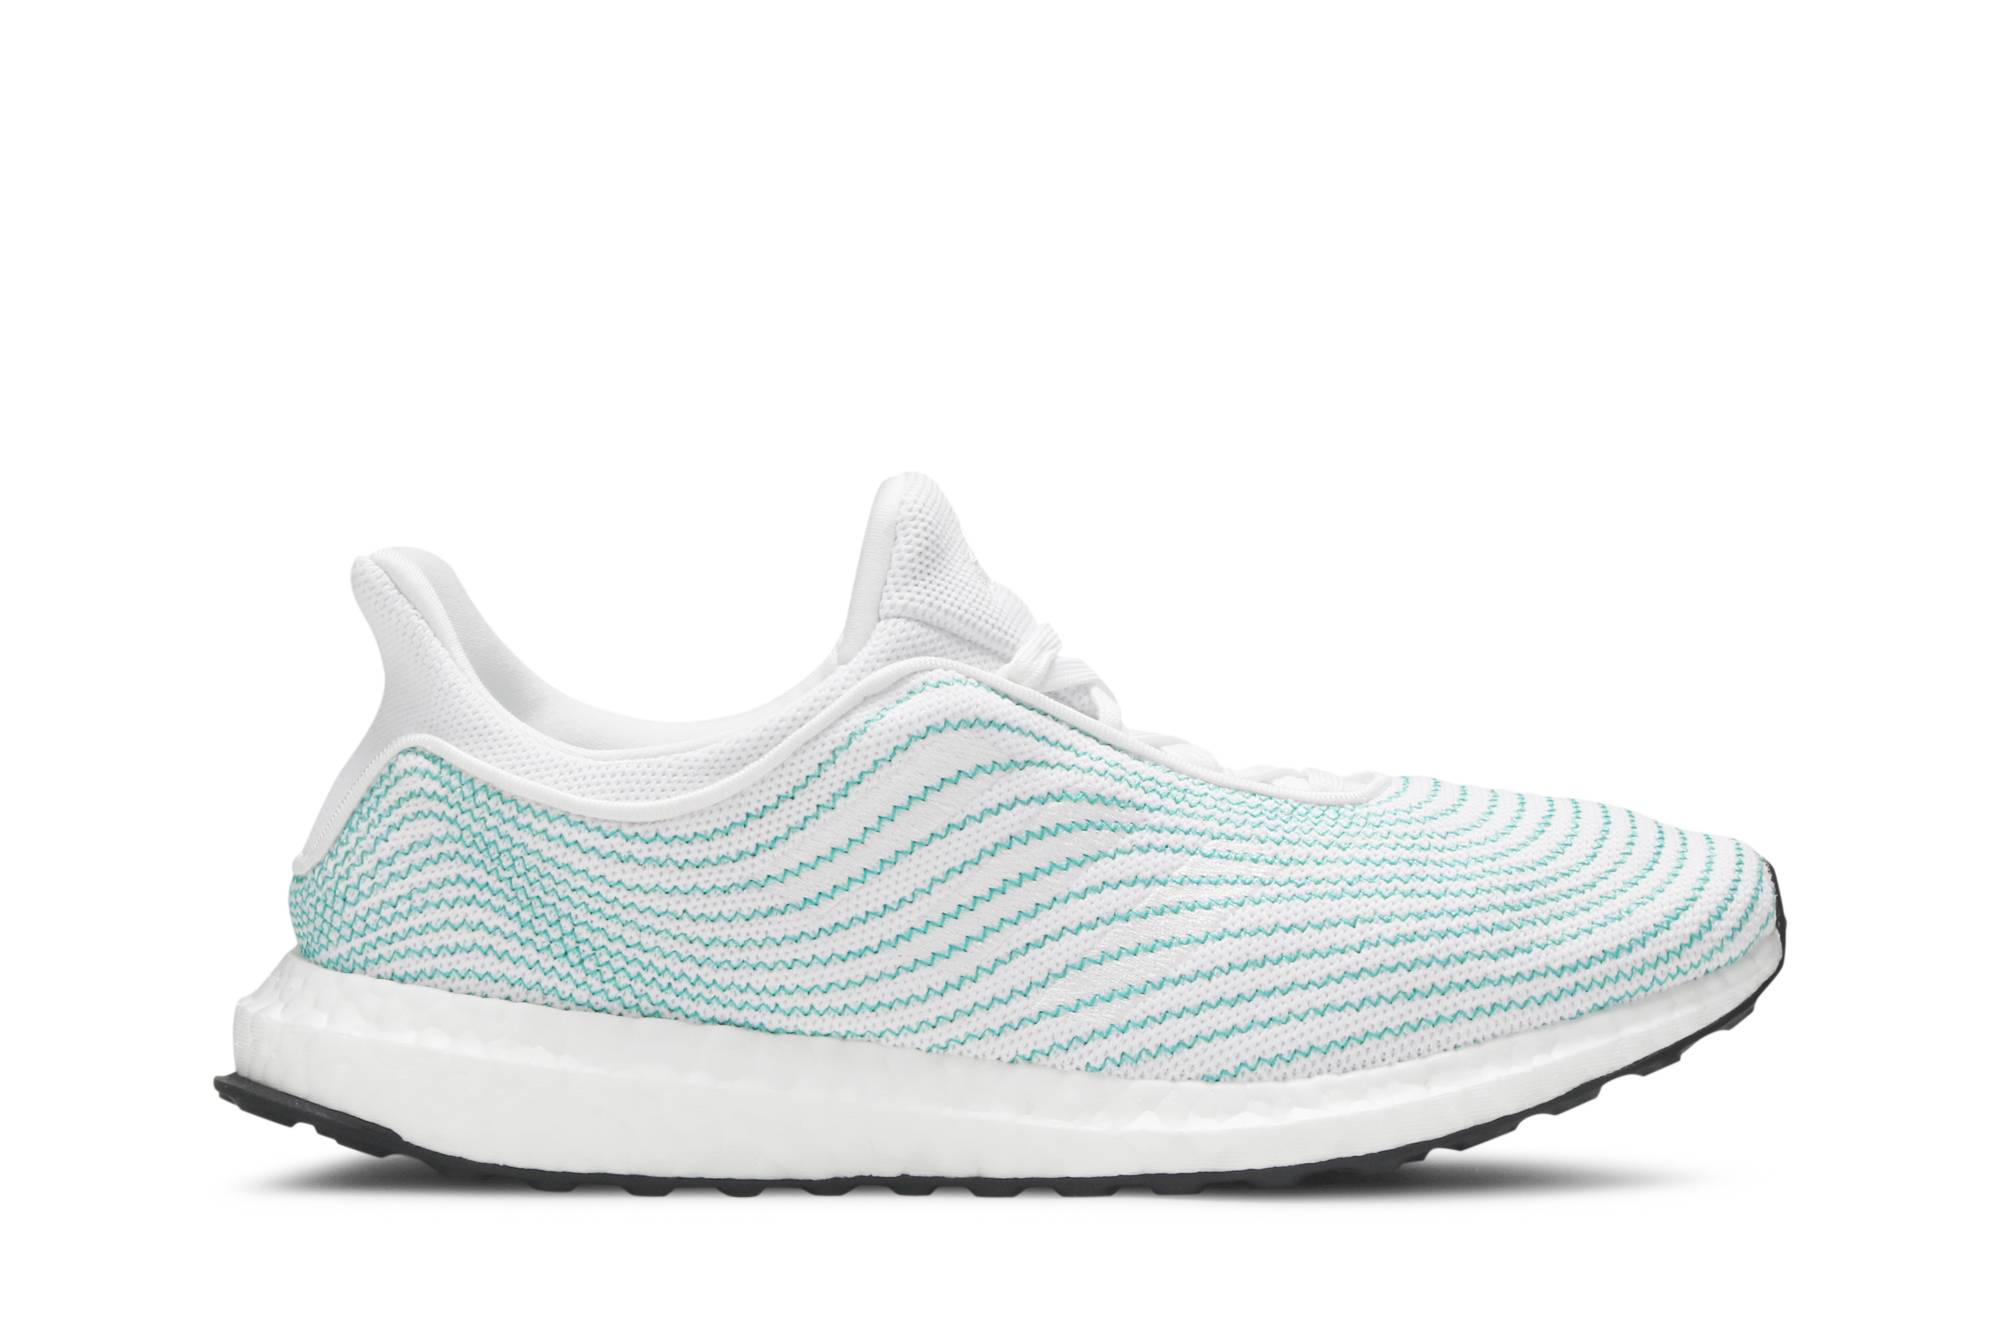 Adidas Parley x UltraBoost DNA - Cloud White (EH1173)